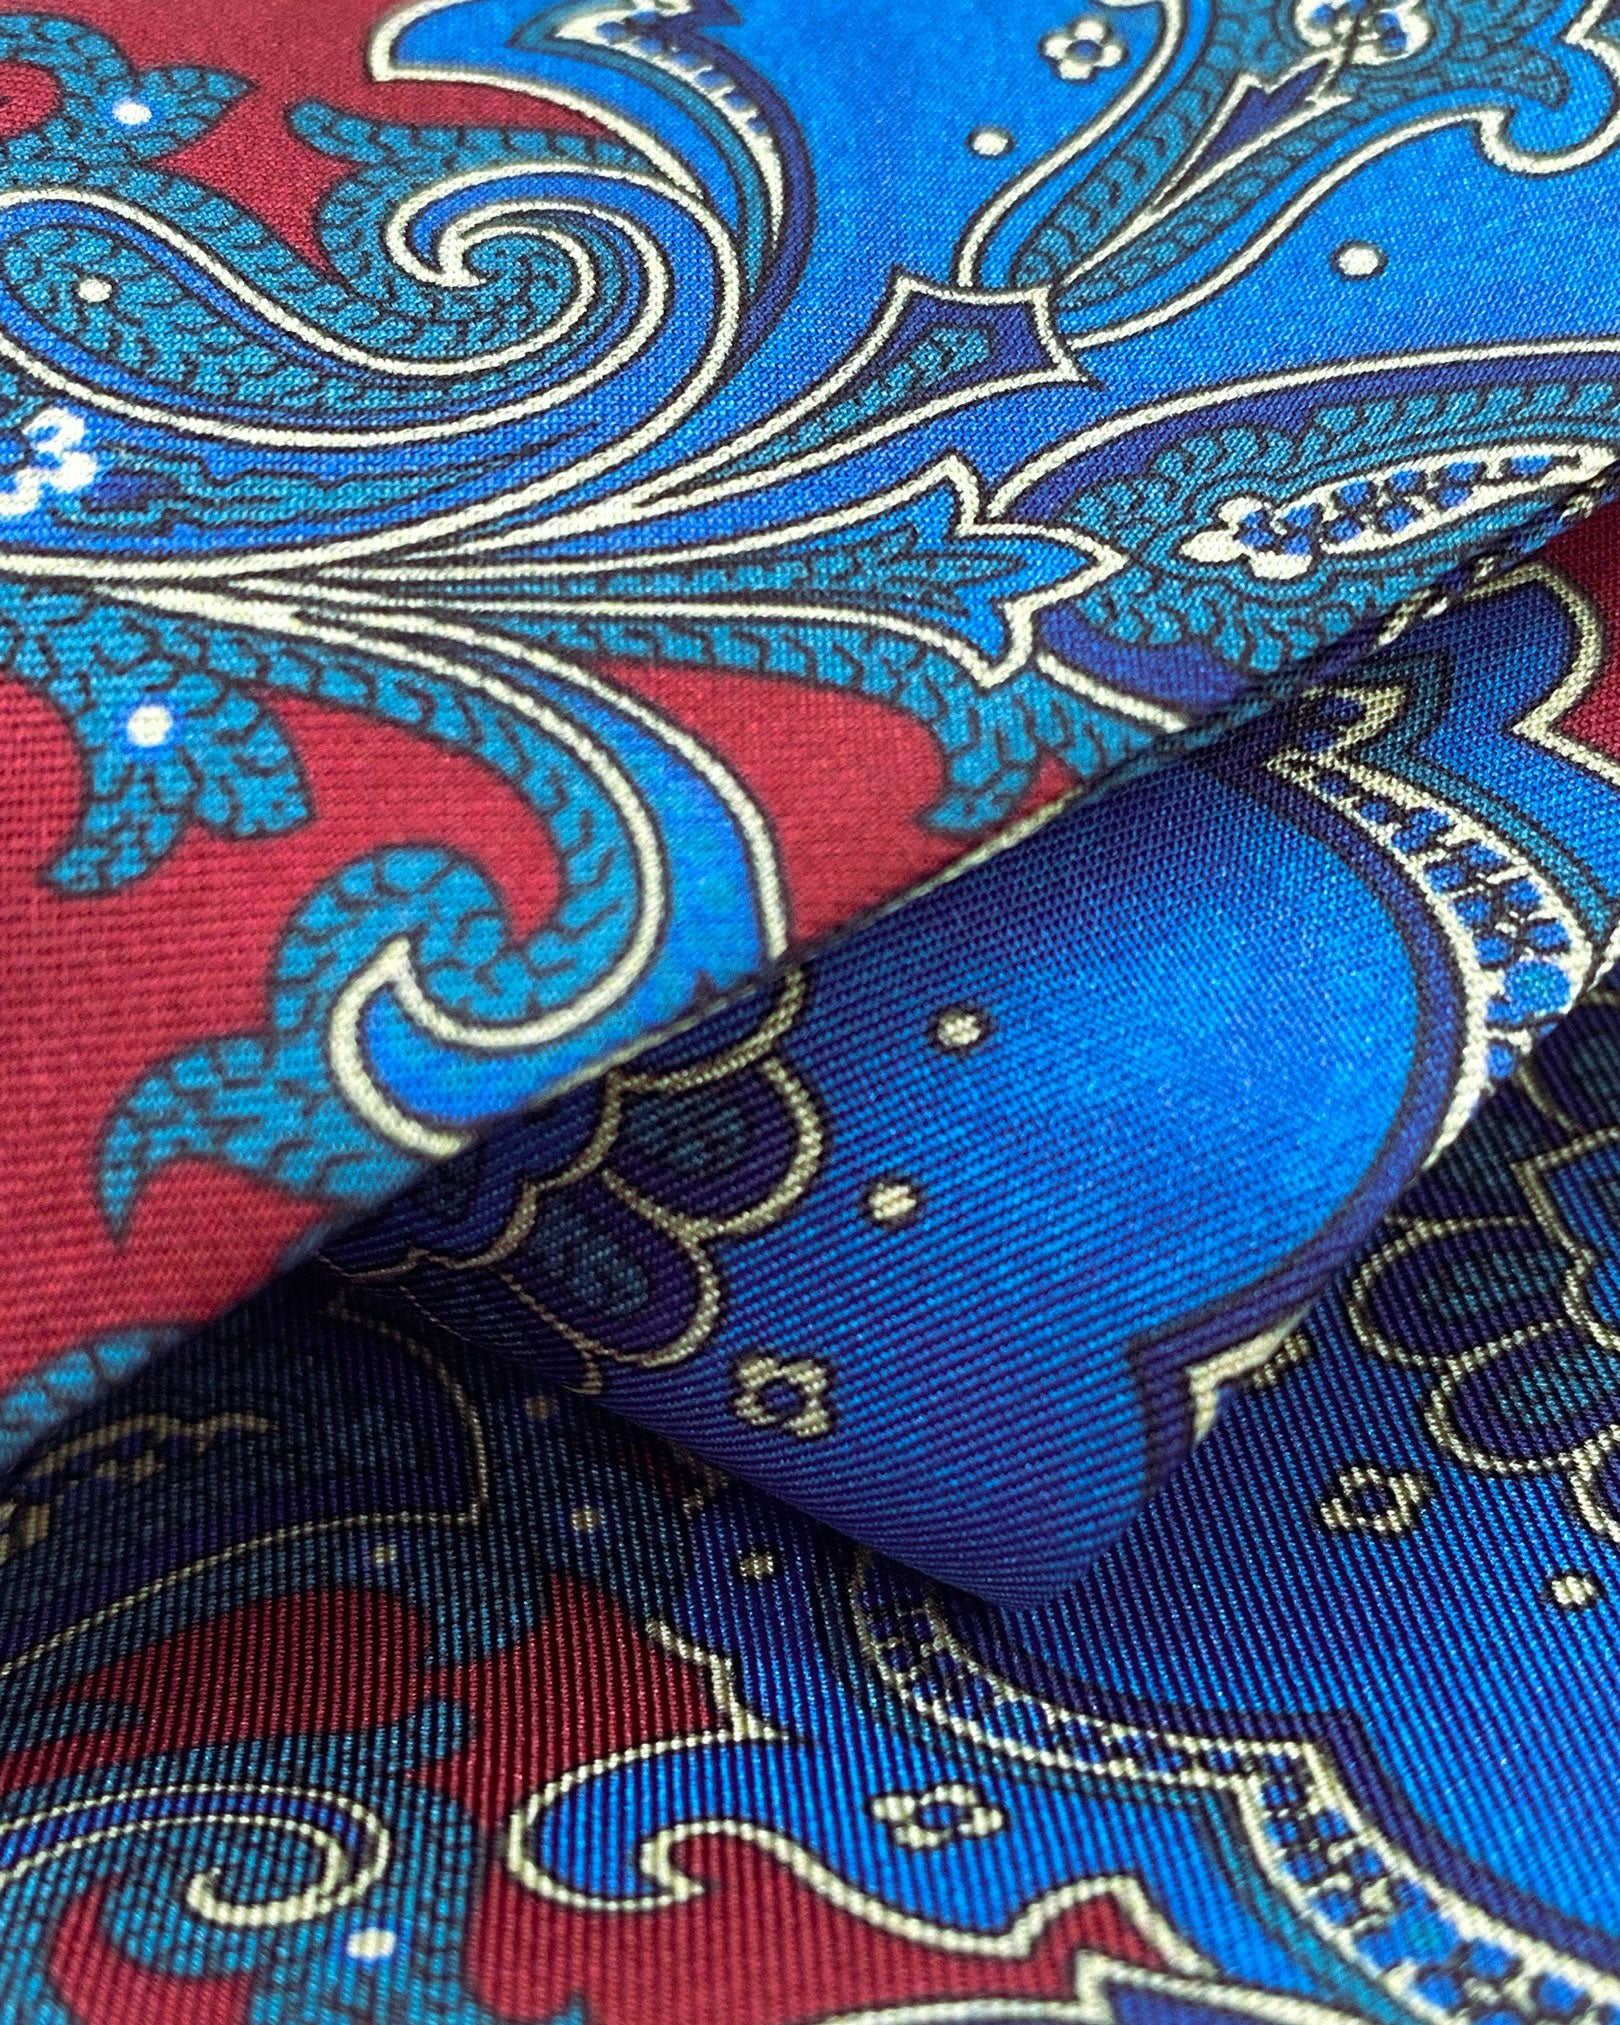 Ruffled close-up view of the 'Dean' silk aviator scarf, presenting a closer view of the swirls of blue paisley intertwined with abstract floral patterns and subtle lustre of the material.